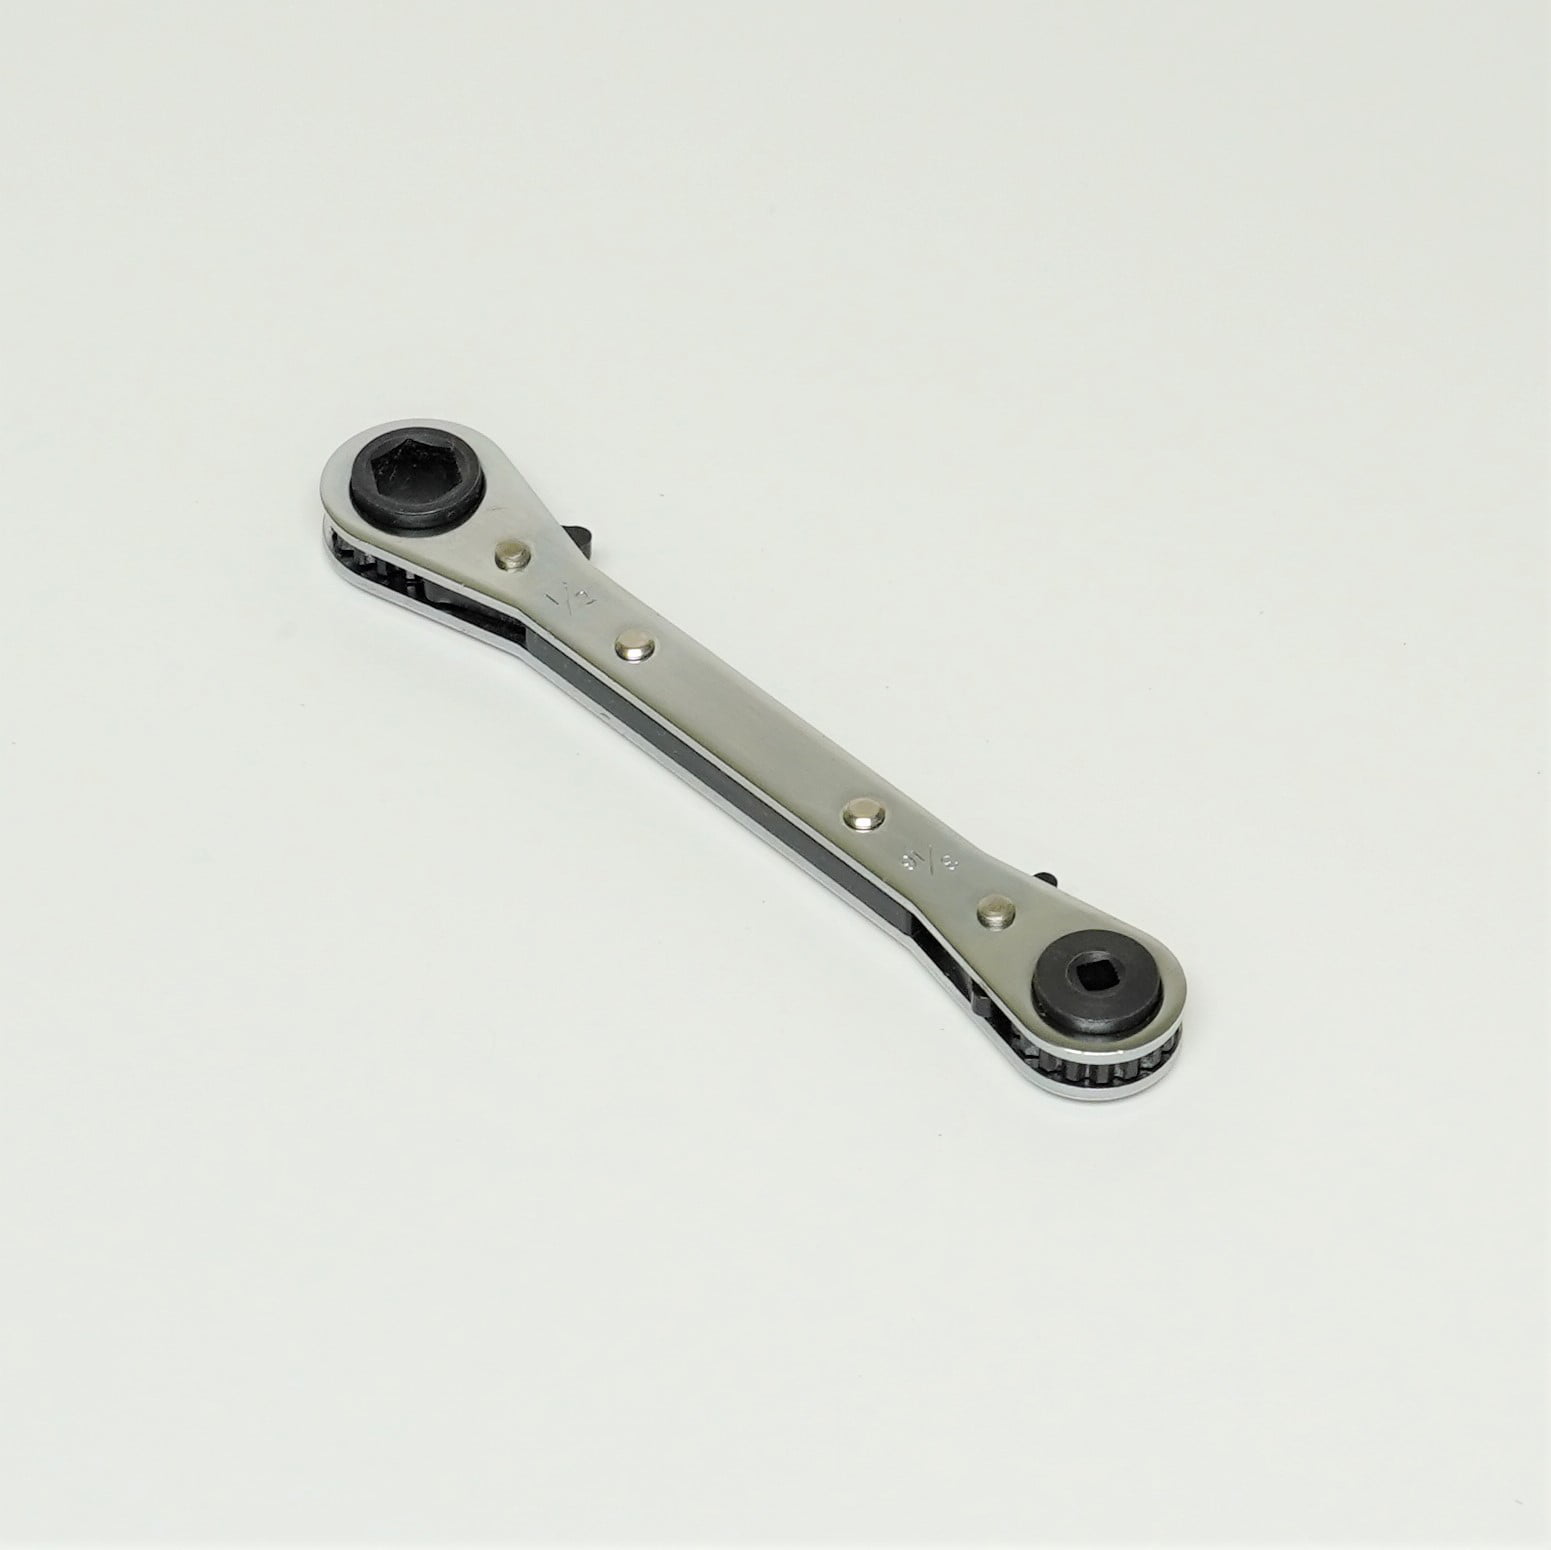 9/16" 1/2" HEX & 4 in 1 Square 3/16"SQU 2 in 1 Refrigation Ratchet Wrench,1/4" 